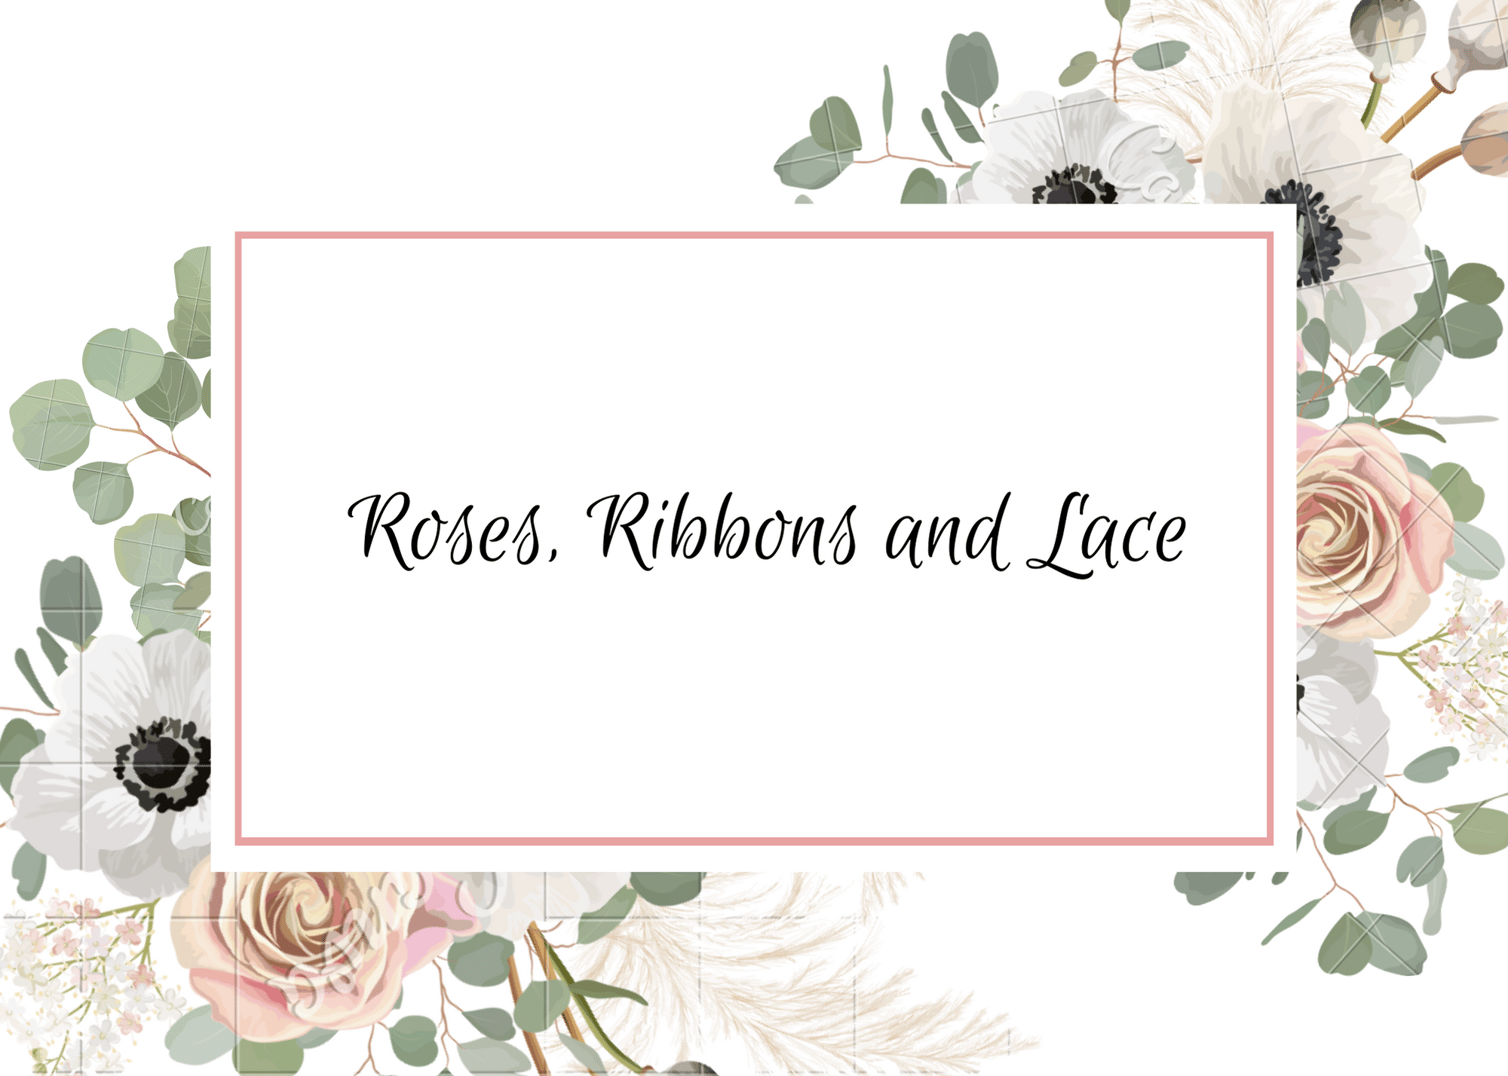 Roses, Ribbons and Lace Home